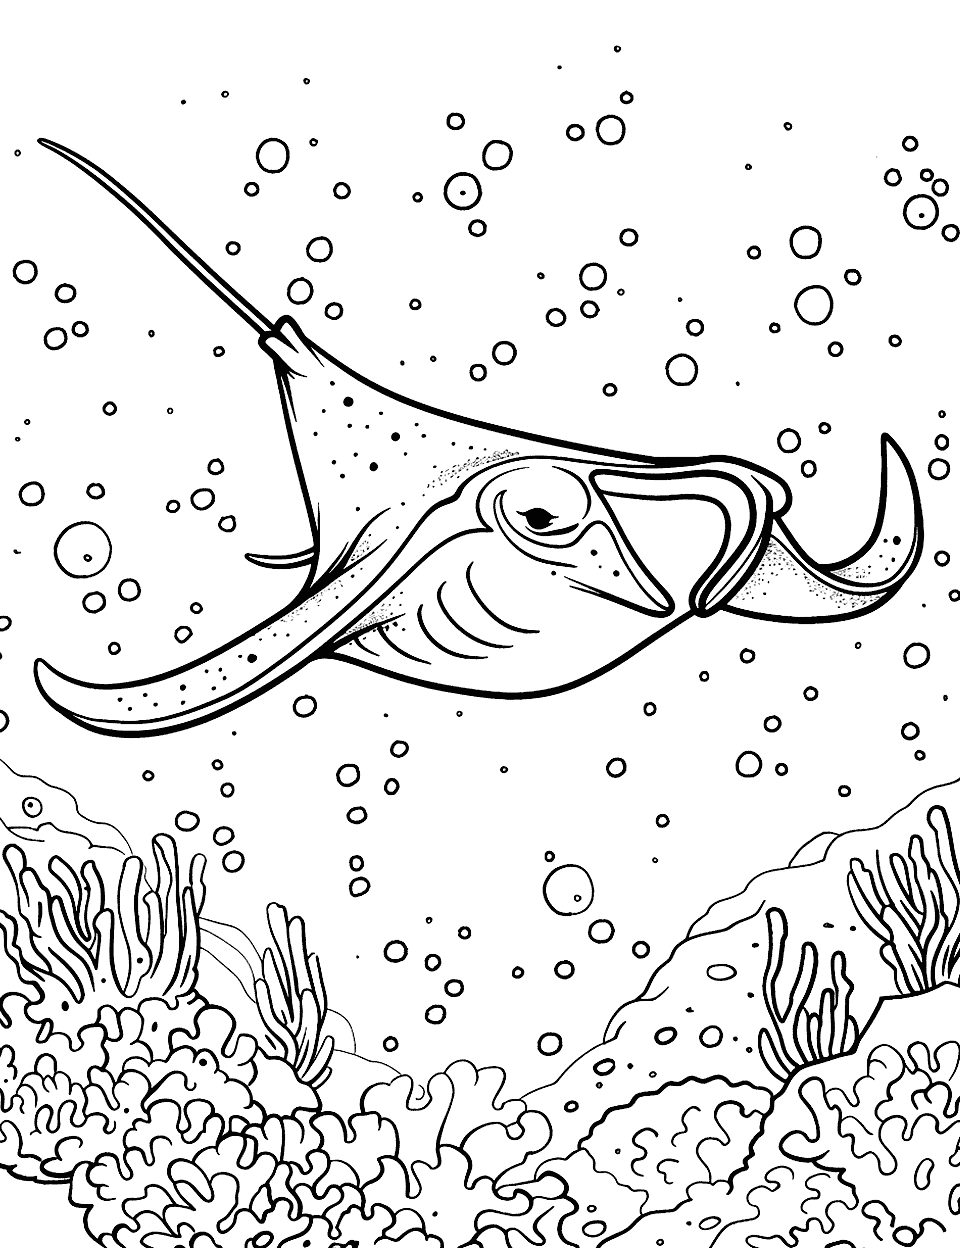 Manta Ray Gliding in the Deep Sea Creature Coloring Page - A manta ray moves effortlessly through the deep ocean waters.